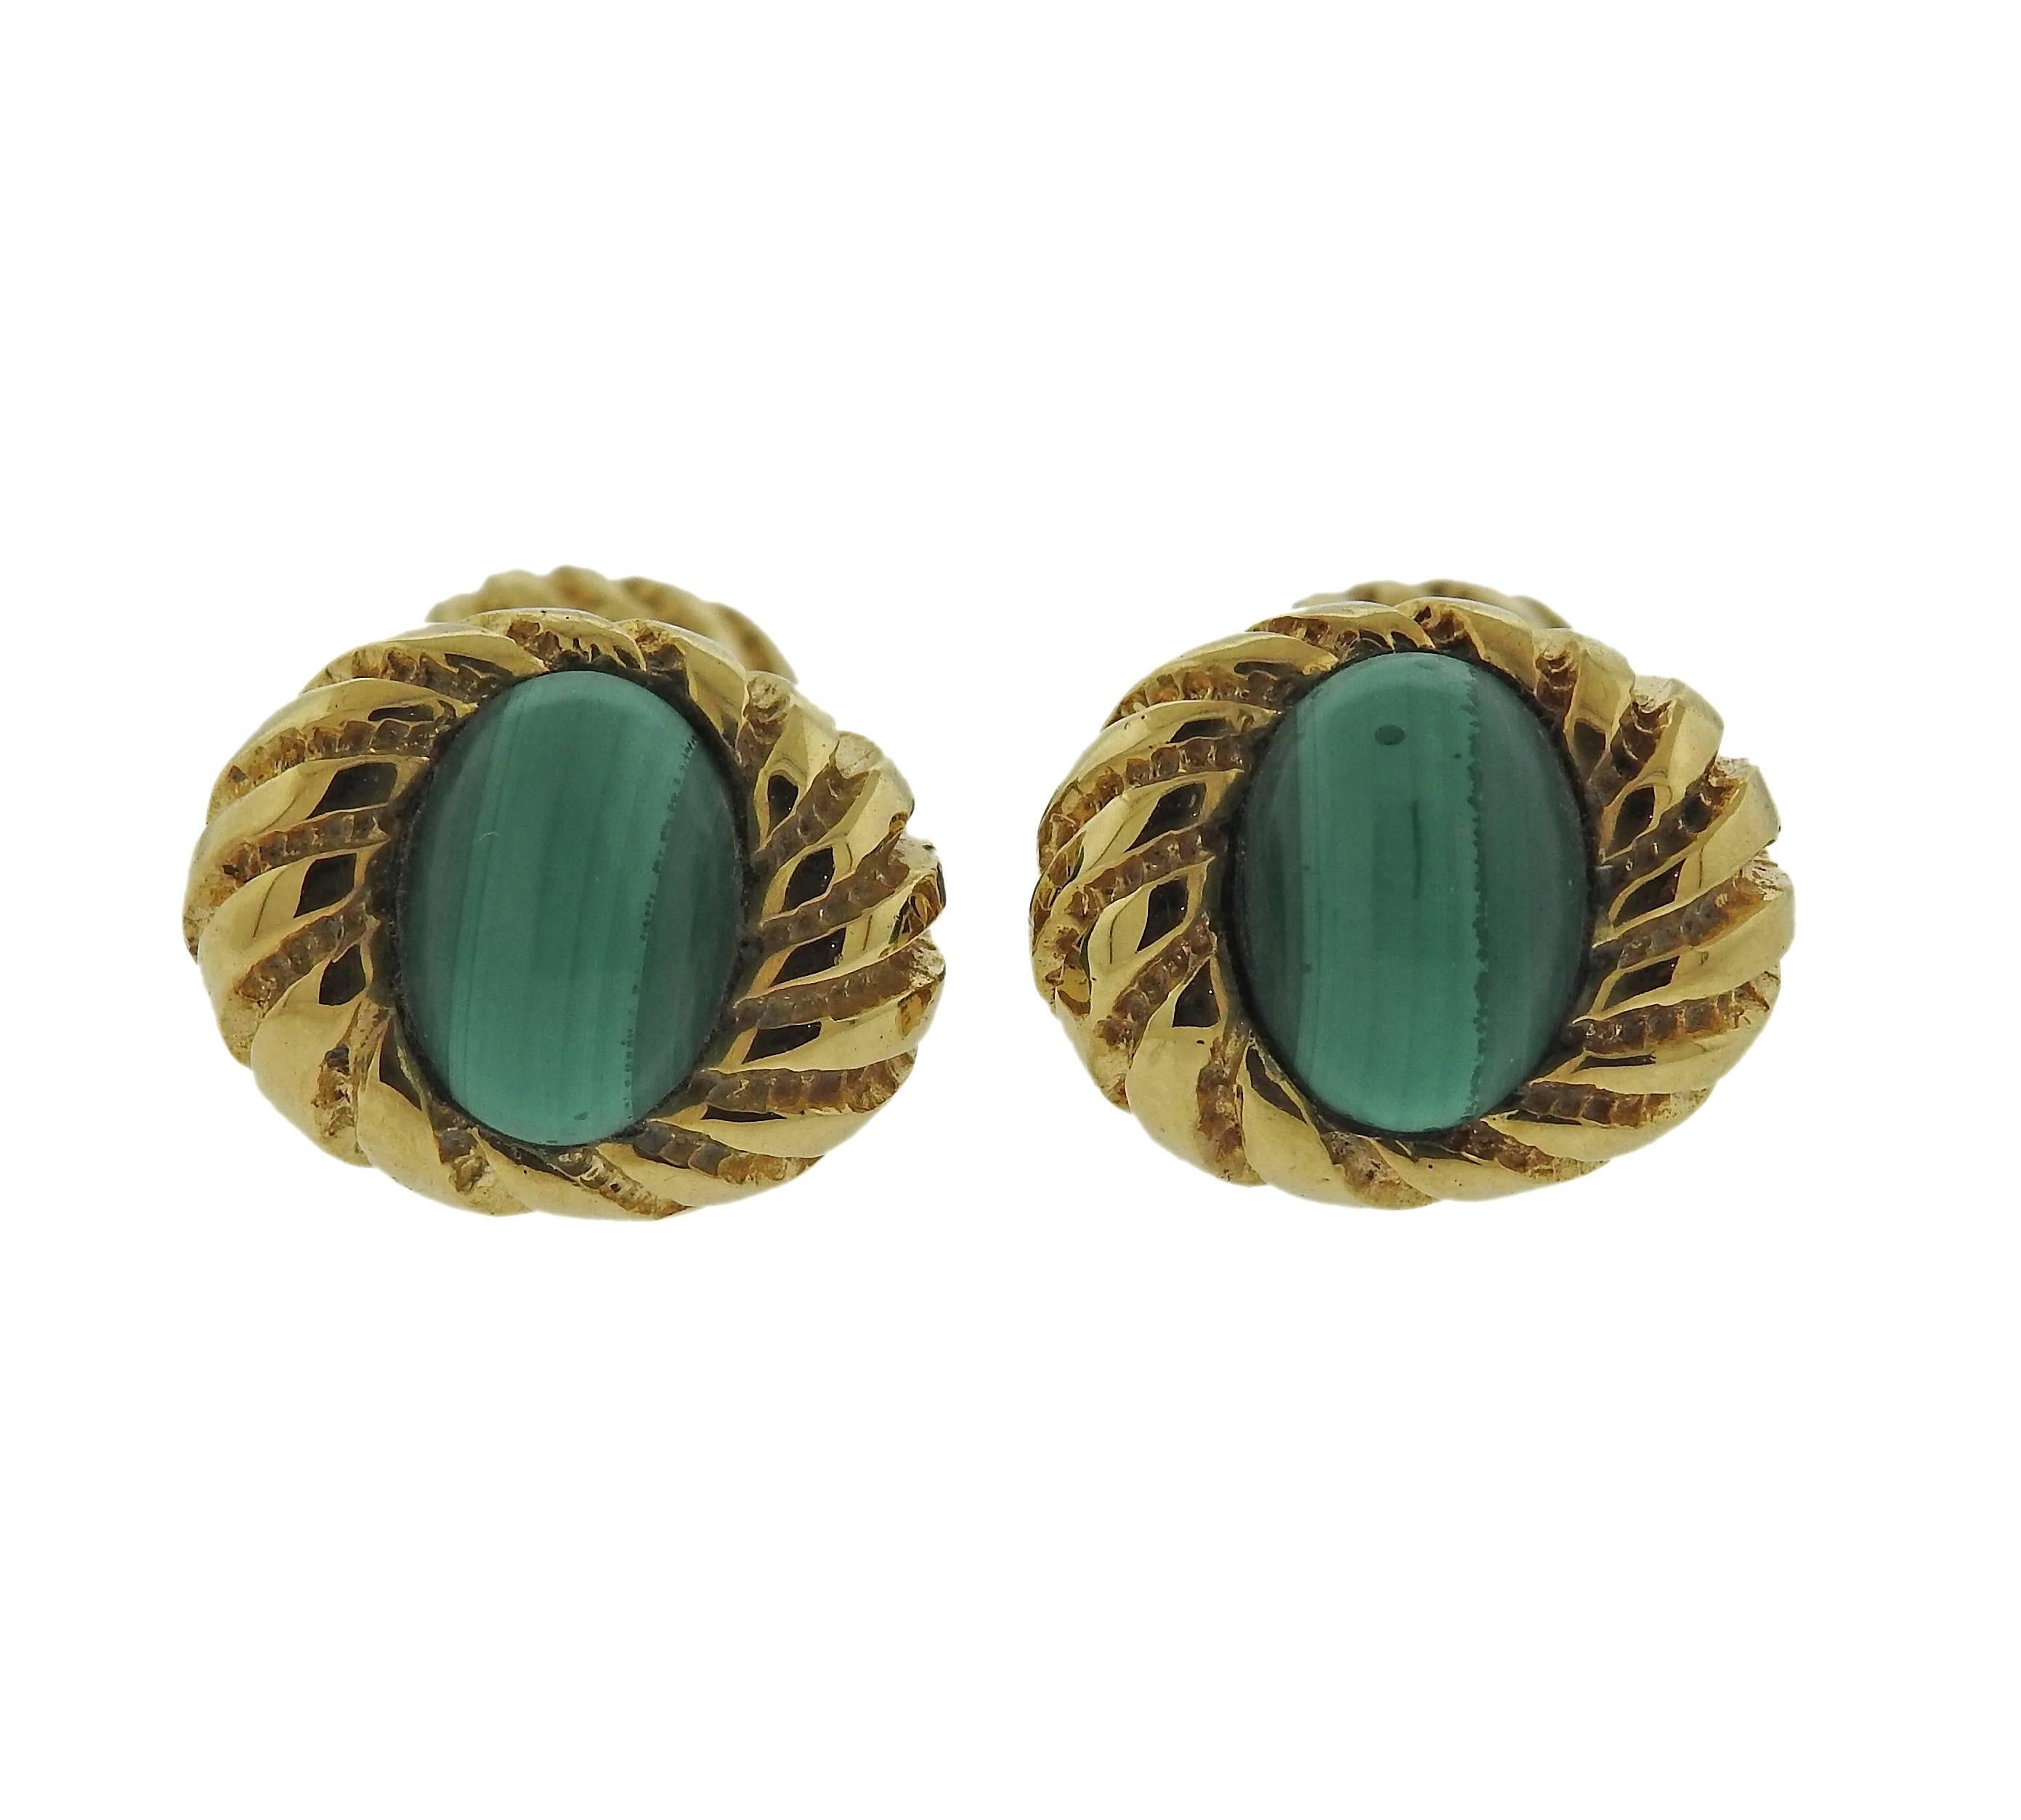 A pair of 18k gold cufflinks featuring malachite, crafted by Jean Schlumberger for Tiffany & Co. Cufflink tops measure 18mm X 15mm, backs measure 11mm X 9mm. Marked Tiffany & Co 18k Schlumberger. Weight is 16.5 grams.